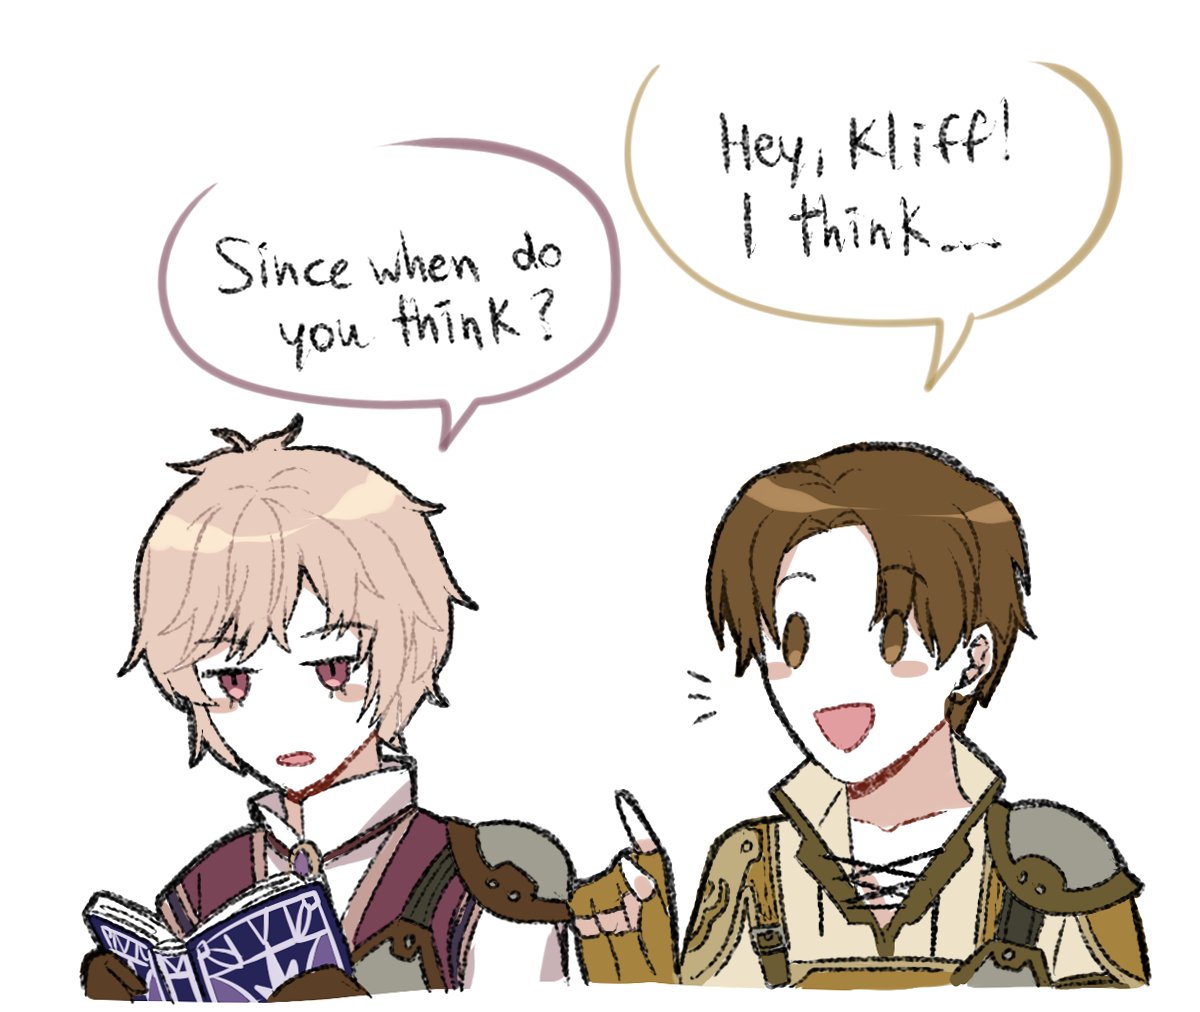 I didn't expect people liking my Tobin/Kliff content uee
Here is a small doodle👍 